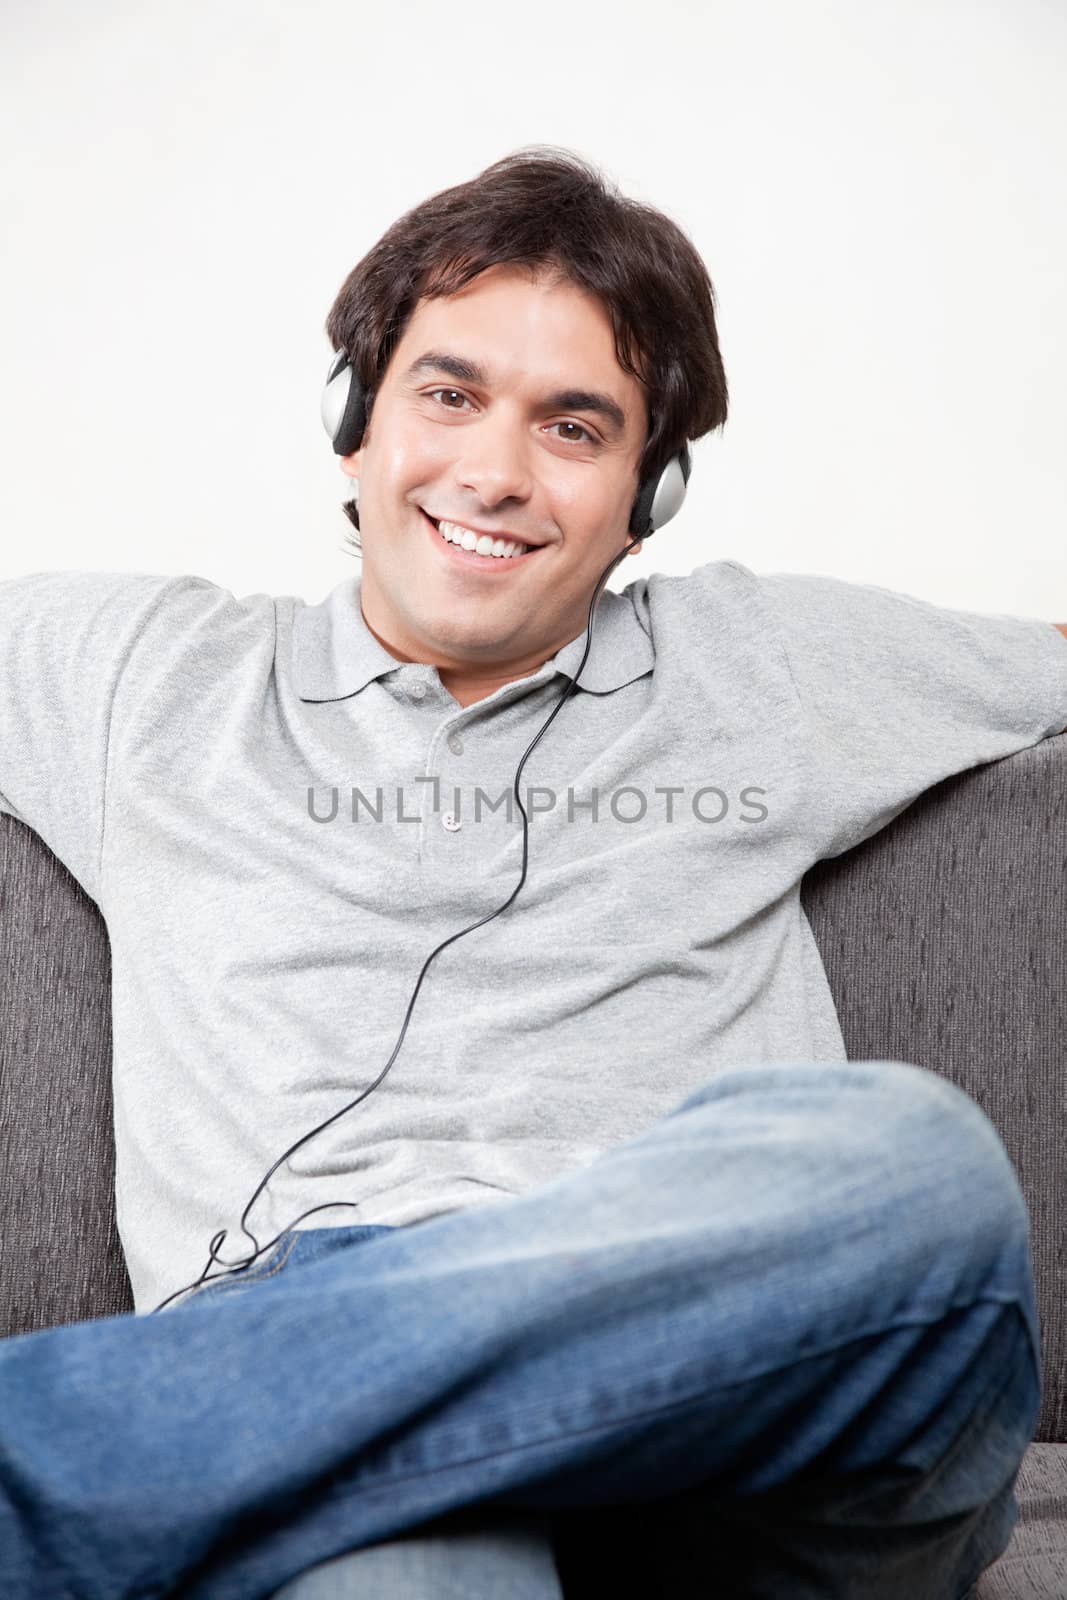 Relaxed young man on couch listening music.